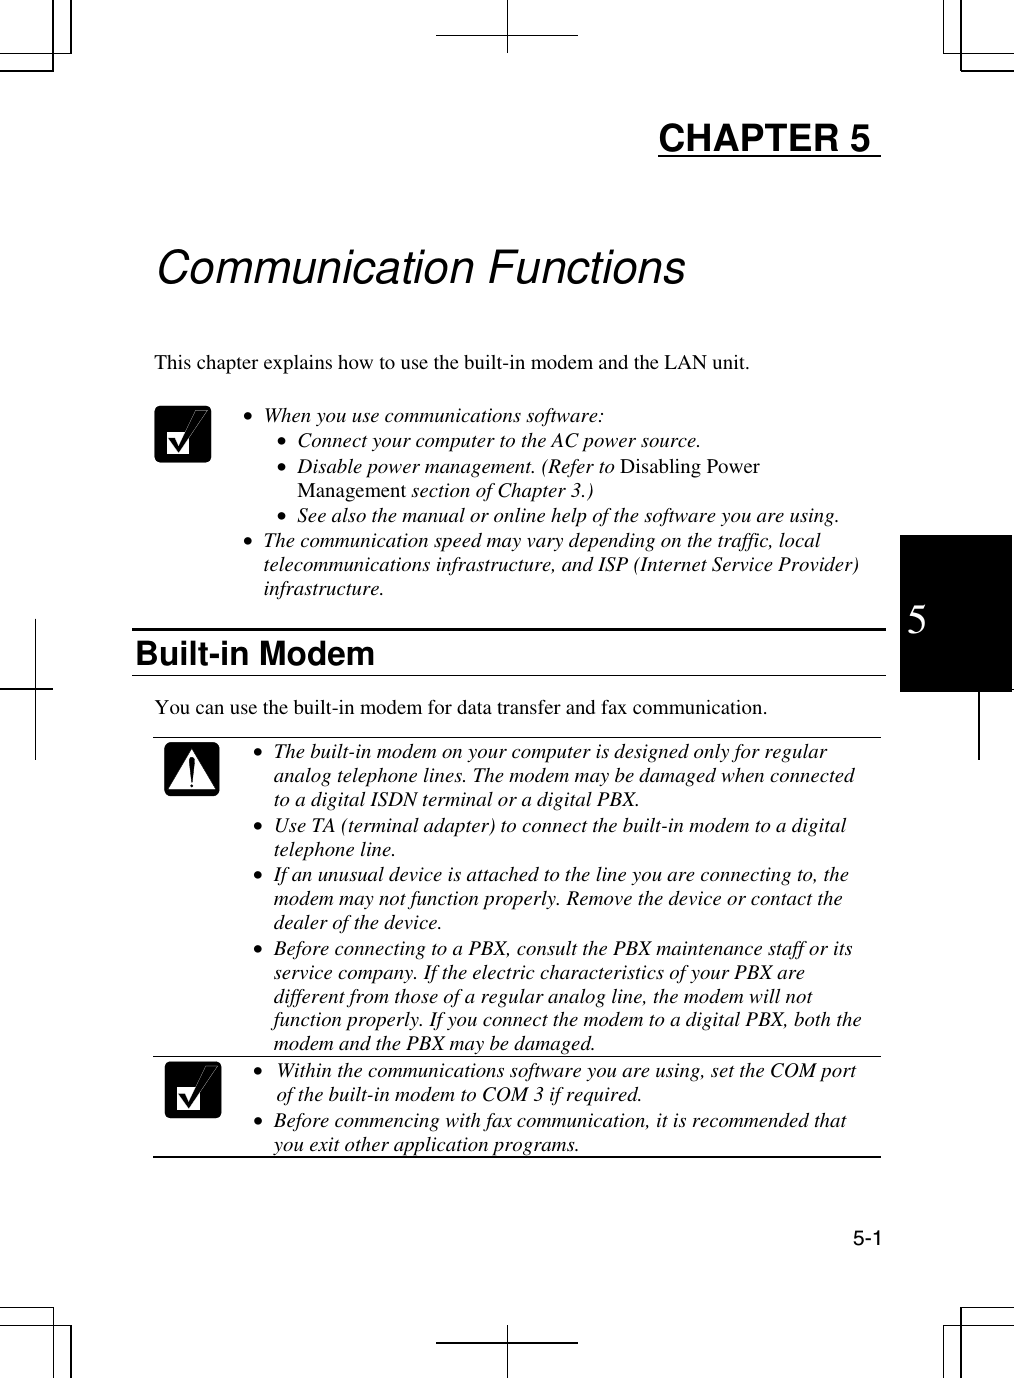  5-1 5 CHAPTER 5     Communication Functions  This chapter explains how to use the built-in modem and the LAN unit.    •  When you use communications software: •  Connect your computer to the AC power source. •  Disable power management. (Refer to Disabling Power Management section of Chapter 3.) •  See also the manual or online help of the software you are using. •  The communication speed may vary depending on the traffic, local telecommunications infrastructure, and ISP (Internet Service Provider) infrastructure.  Built-in Modem   You can use the built-in modem for data transfer and fax communication.    •  The built-in modem on your computer is designed only for regular analog telephone lines. The modem may be damaged when connected to a digital ISDN terminal or a digital PBX. •  Use TA (terminal adapter) to connect the built-in modem to a digital telephone line. •  If an unusual device is attached to the line you are connecting to, the modem may not function properly. Remove the device or contact the dealer of the device. •  Before connecting to a PBX, consult the PBX maintenance staff or its service company. If the electric characteristics of your PBX are different from those of a regular analog line, the modem will not function properly. If you connect the modem to a digital PBX, both the modem and the PBX may be damaged.   •  Within the communications software you are using, set the COM port of the built-in modem to COM 3 if required. •  Before commencing with fax communication, it is recommended that you exit other application programs.  